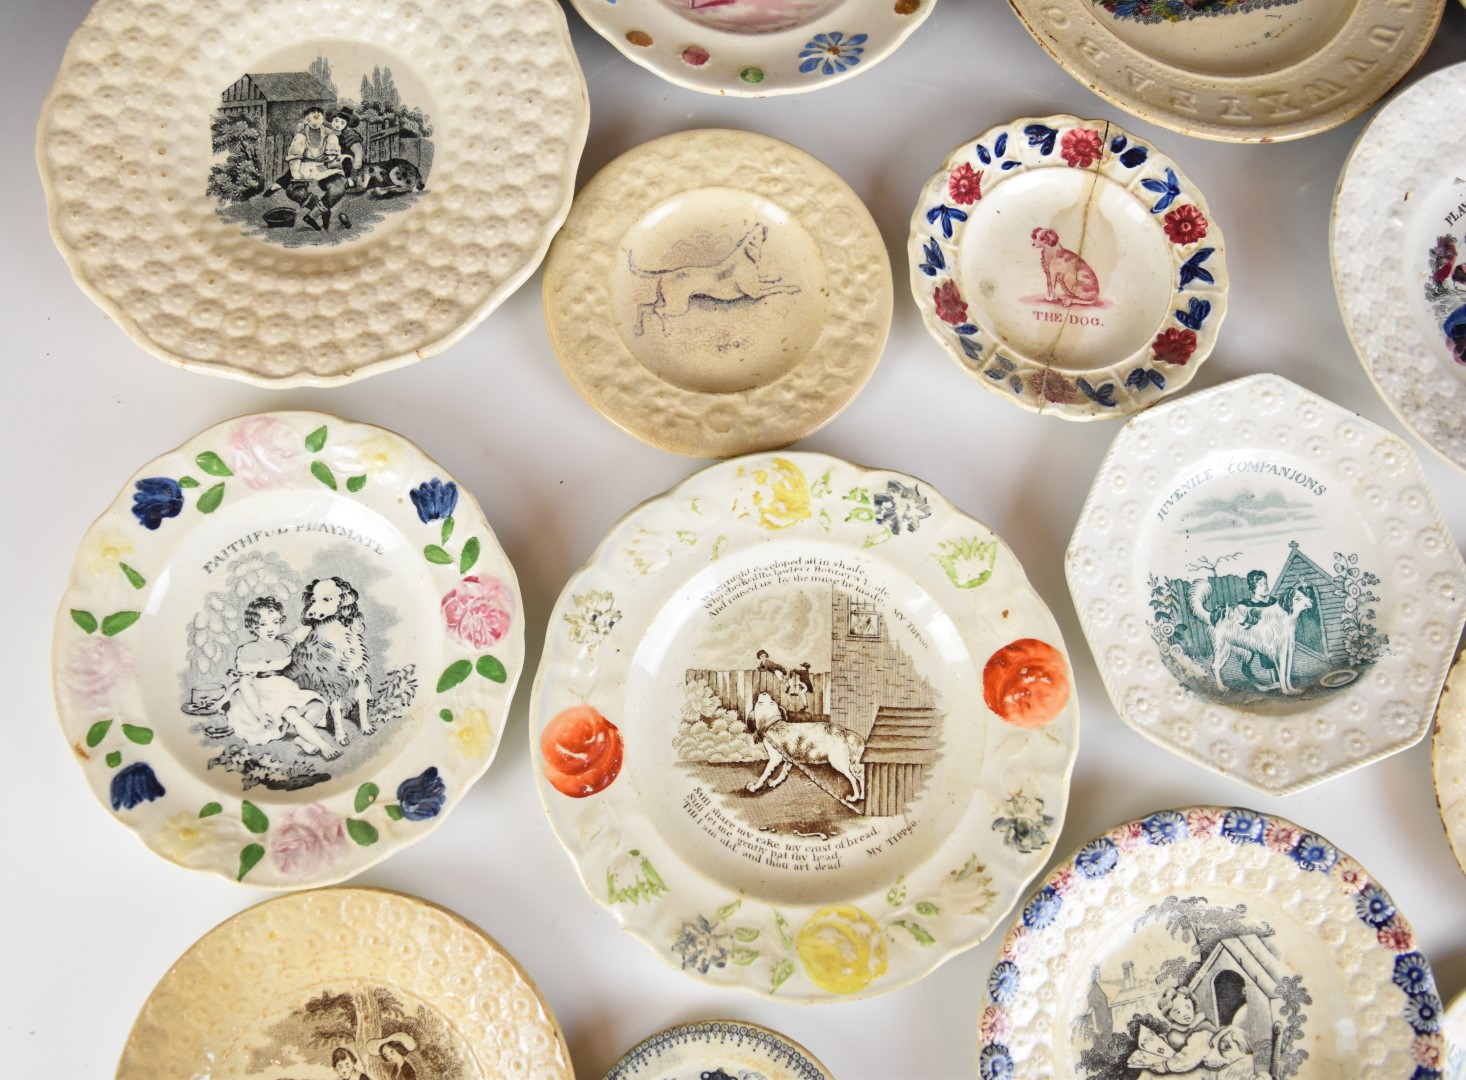 19thC nursery ware plates, mostly featuring dogs / children including The Pet, A Presant, Juvenile - Image 4 of 7